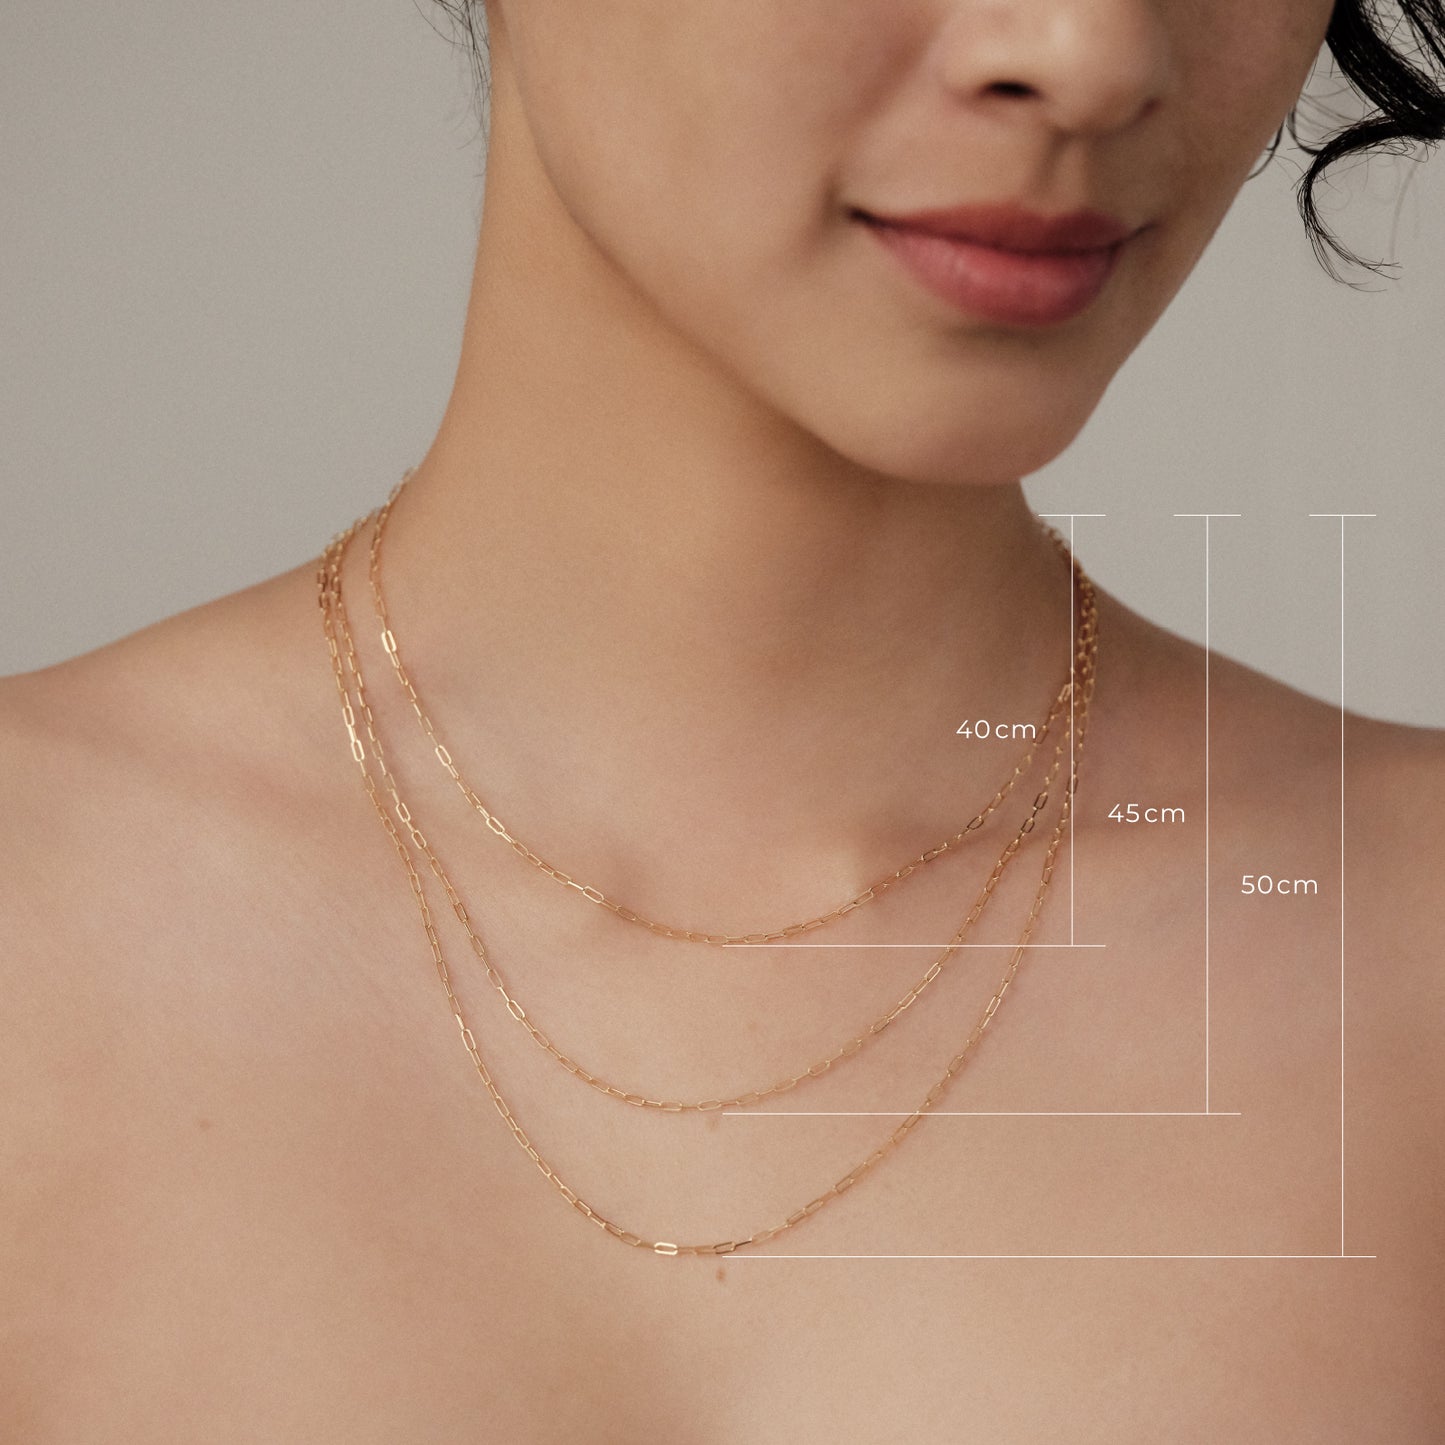 mitisマタニティジュエリーセット ゴールド（Babyring Gold × Necklace Gold）